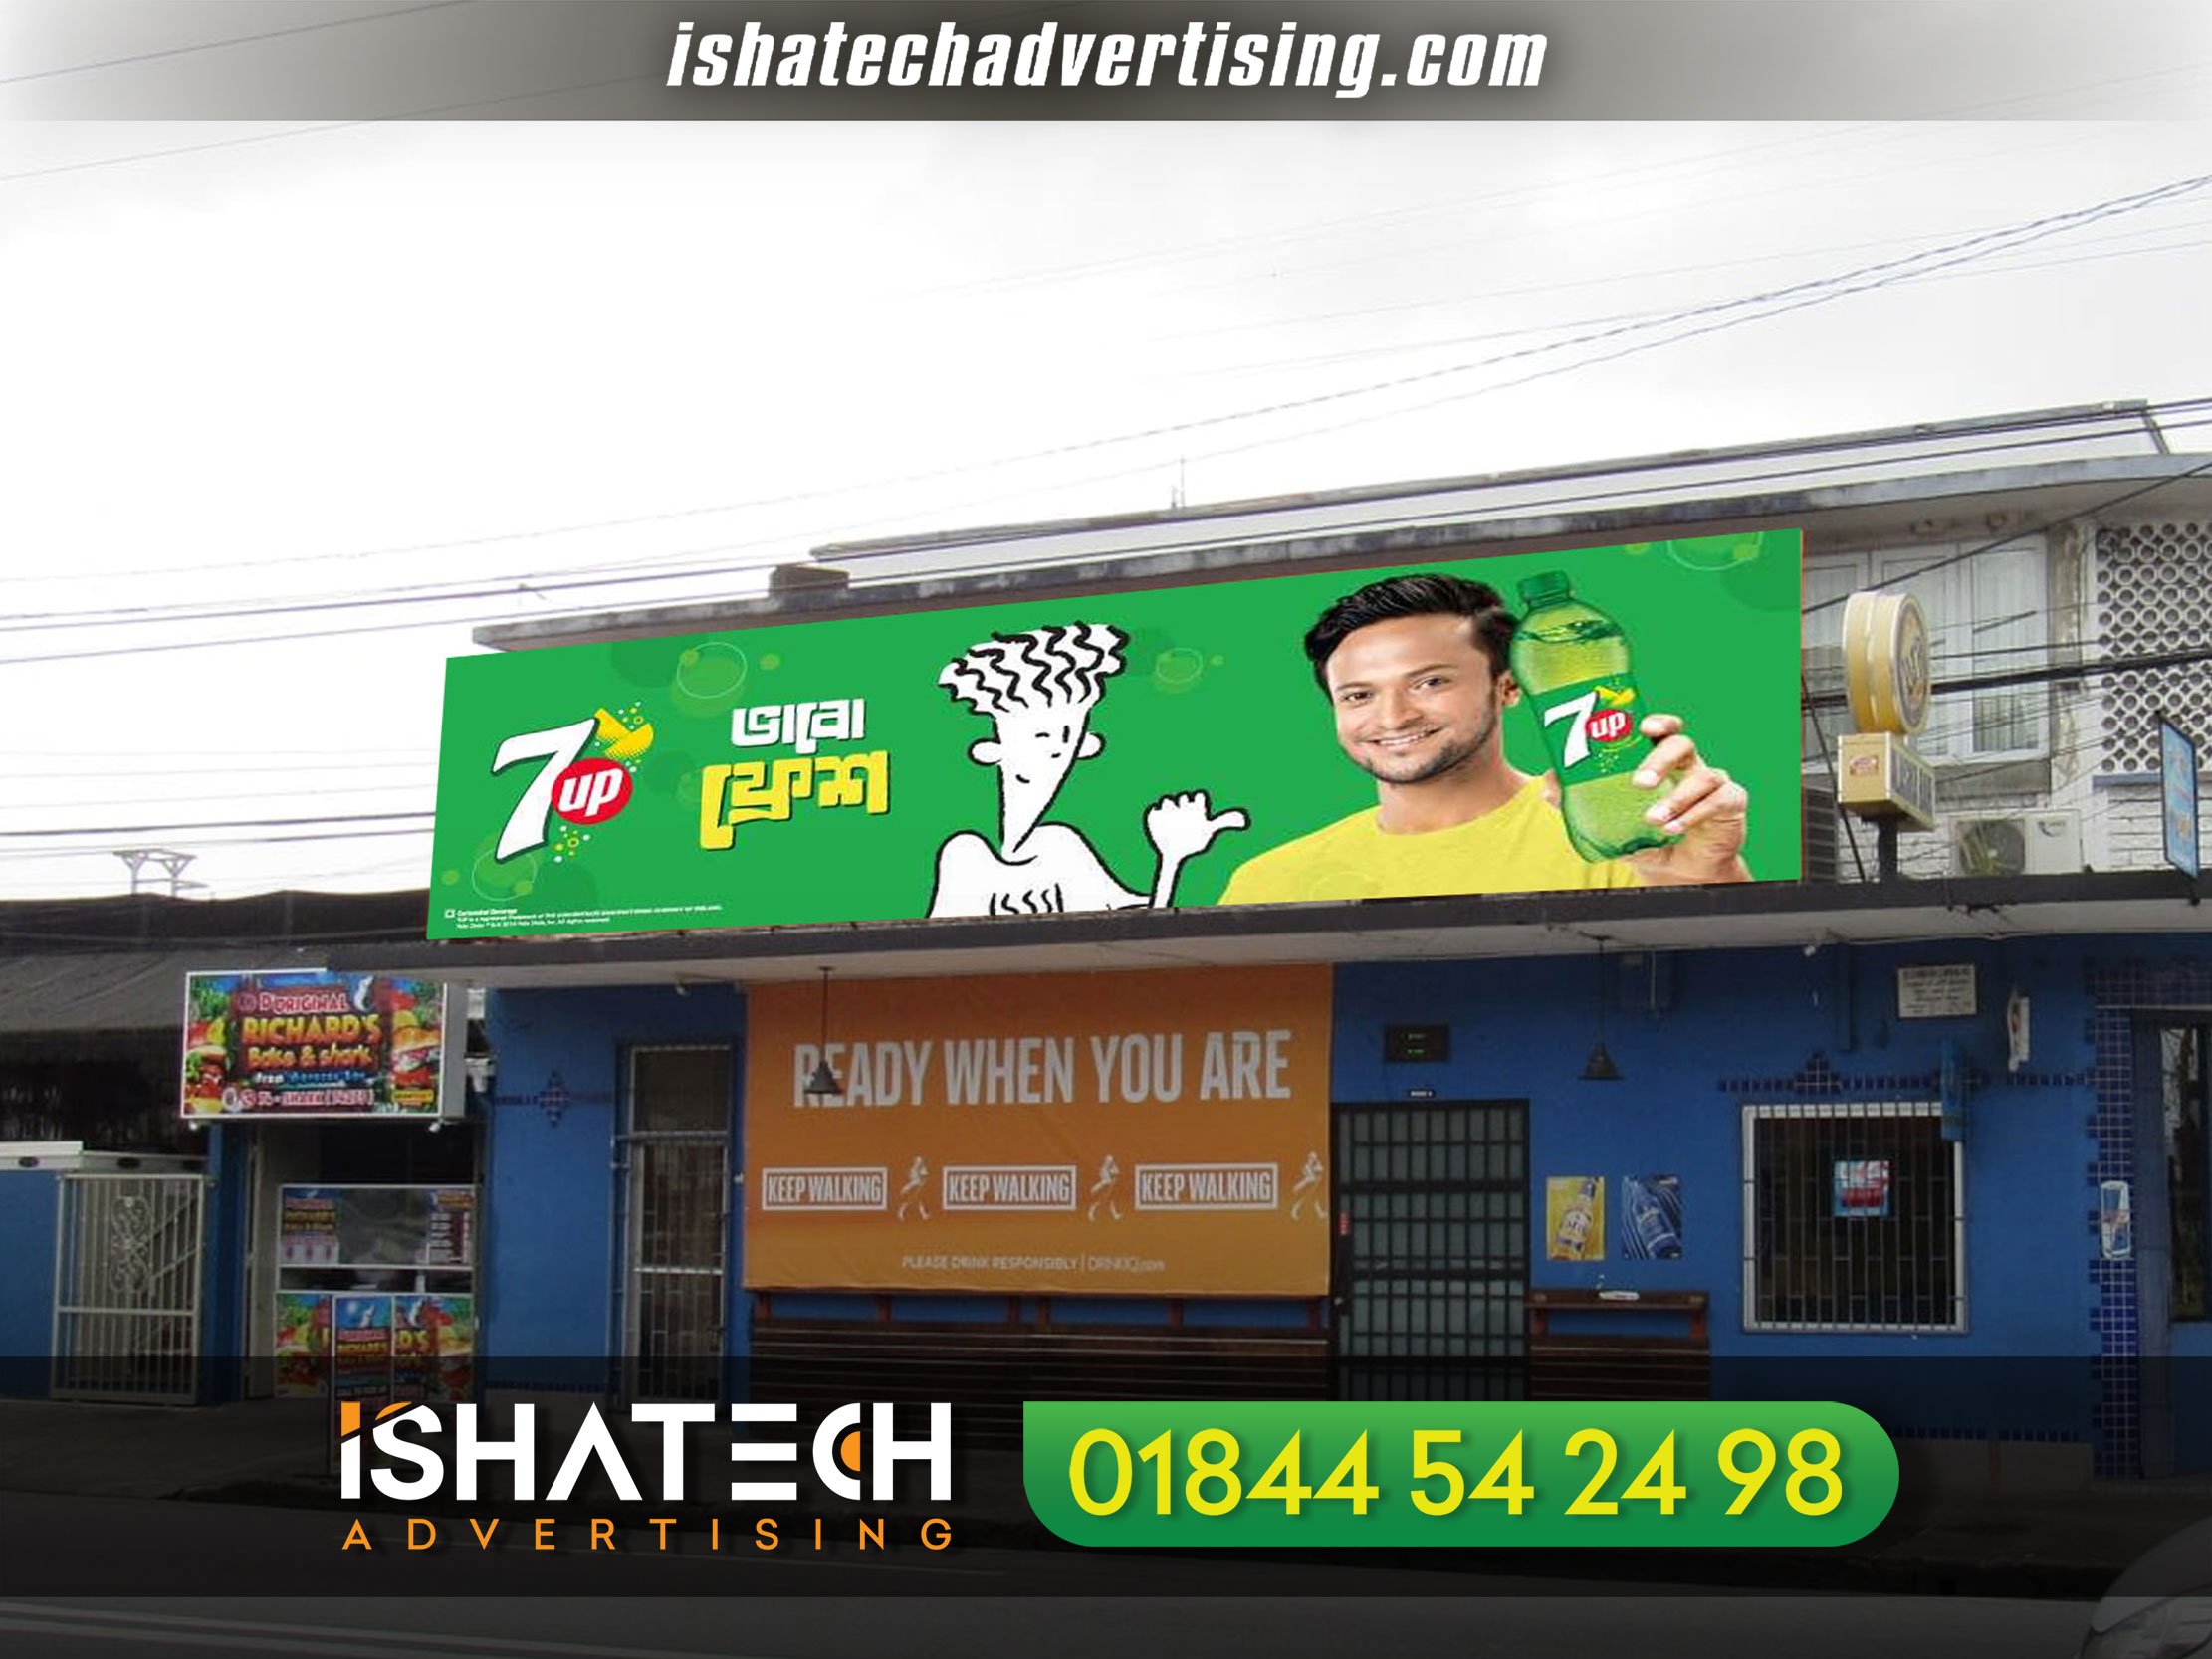 Road And Highway Billboard Making in Dhaka Bangladesh, Best Led Advertising in Dhaka Bangladesh, Led Billboard Making BD, Signboard Making BD, Officer Billboard BD, indoor billboard, Best Outdoor Billboard Making in Dhaka Bangladesh, Signboard BD, Best Domain Hosting Company in Dhaka, it Advertising Billboard, Billboard BD, Phone Company Billboard, Sim Company Billboard, Billboard BD, Billboard Ads Pro, Premier Cement Billboard Design, Real Estate Billboard, Project Billboard Advertising Steel Billboard Structure Steel Board Outdoor Signage, All Kind of #DigitalPrint Pana, PVC, Shop Sign, Name Plate, #Lighting Sign Board, #LEDSign, Neon Sign, Acrylic Sign, Moving Display, #Billboard, Radio Ad, #NewspaperAd, TV Ad, #FairStall & Event #Management Ad Etc. Hope You’re Interest! #neonsign #signboard #eventmanagement #signage #stall #digitalprint #sign #display #board #acrylic #neon #plate #ledsign #lighting #printing #graphicdesign #service #marketing #ad #branding #print #advertising #BillBoard #DigitalBoard #SteelBoard #LocalBoard #StandBoardNonlitBoard #Structure #Structural. top billboard advertising agency in dhaka bangladesh. top 10 billboard advertising agency in dhaka bangladesh. list of billboard advertising agency in dhaka bangladesh. billboard advertising agency in dhaka bangladesh price. best billboard advertising agency in dhaka bangladesh. billboard advertising cost in bangladesh. billboard advertising bd. billboard rent in dhaka. real estate billboard, project billboard making in Dhaka Bangladesh, Besl Led Billboard Making Company in Dhaka Bangladesh. Pepsi Billboard Making BD, Coca Cola Billboard Making BD, Best Led Advertising Making BD,